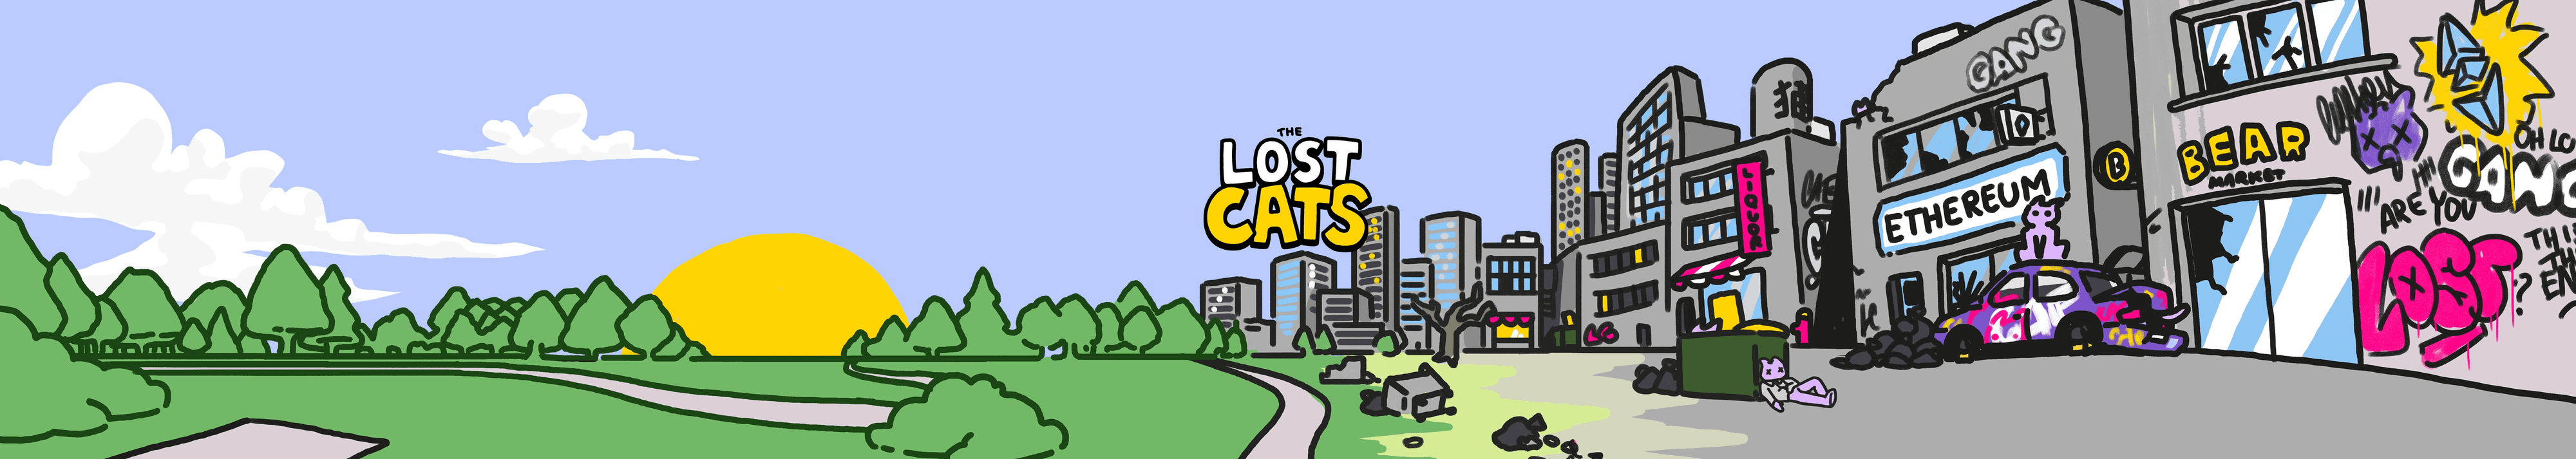 THE_LOST_CATS_VAULT 横幅